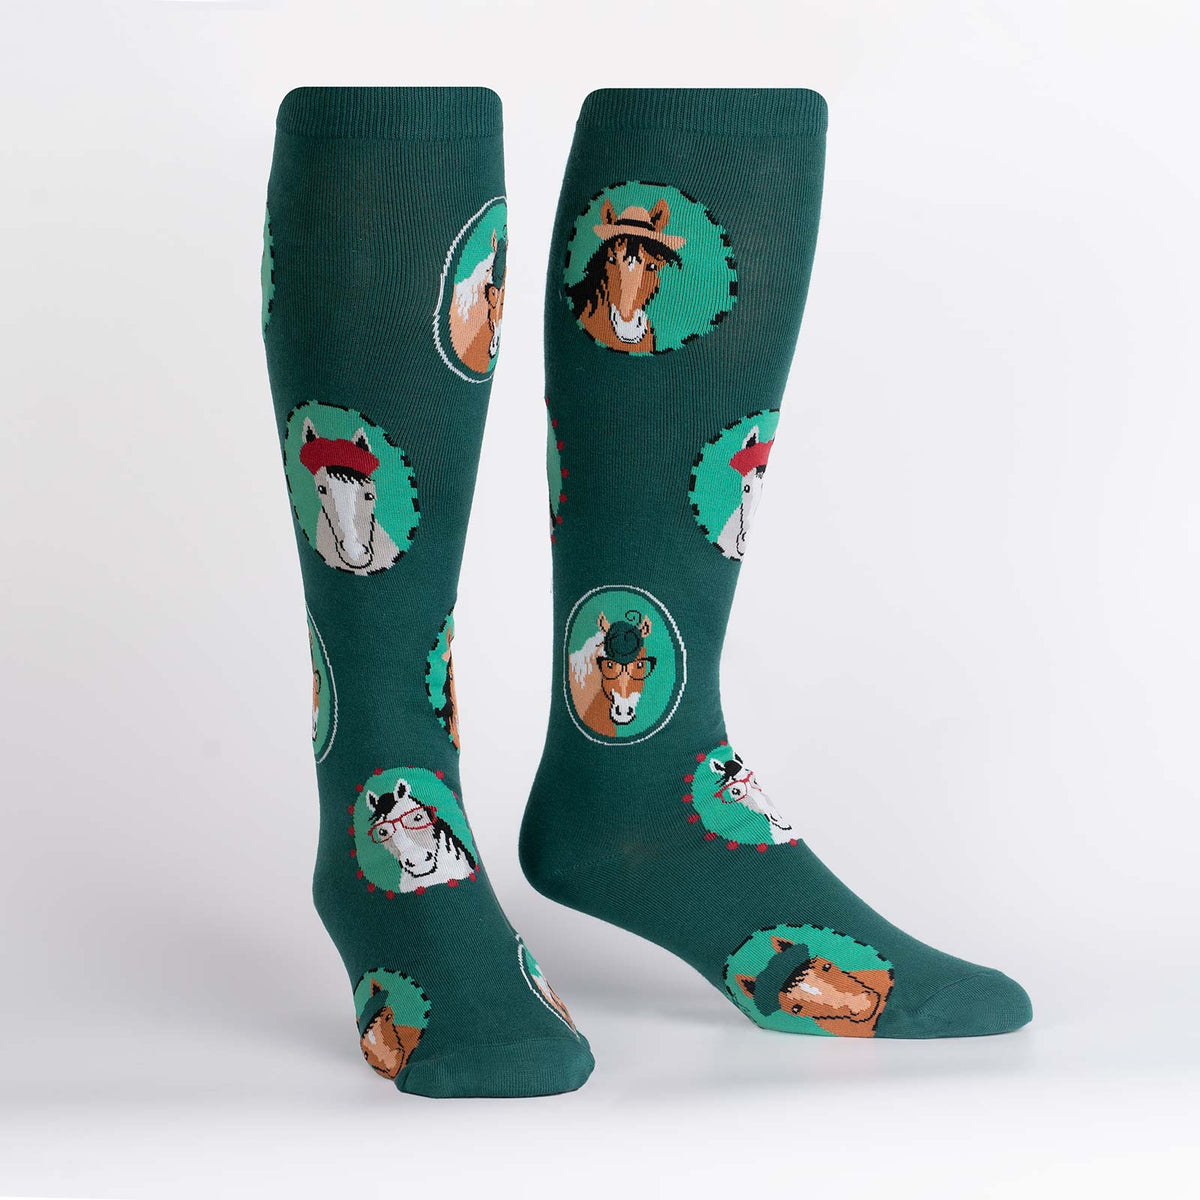 Sock It To Me Horsing Around extra-stretchy women&#39;s and men&#39;s knee high socks featuring teal socks with pictures of horses wearing hats and/or glasses. Socks shown on display feet. 